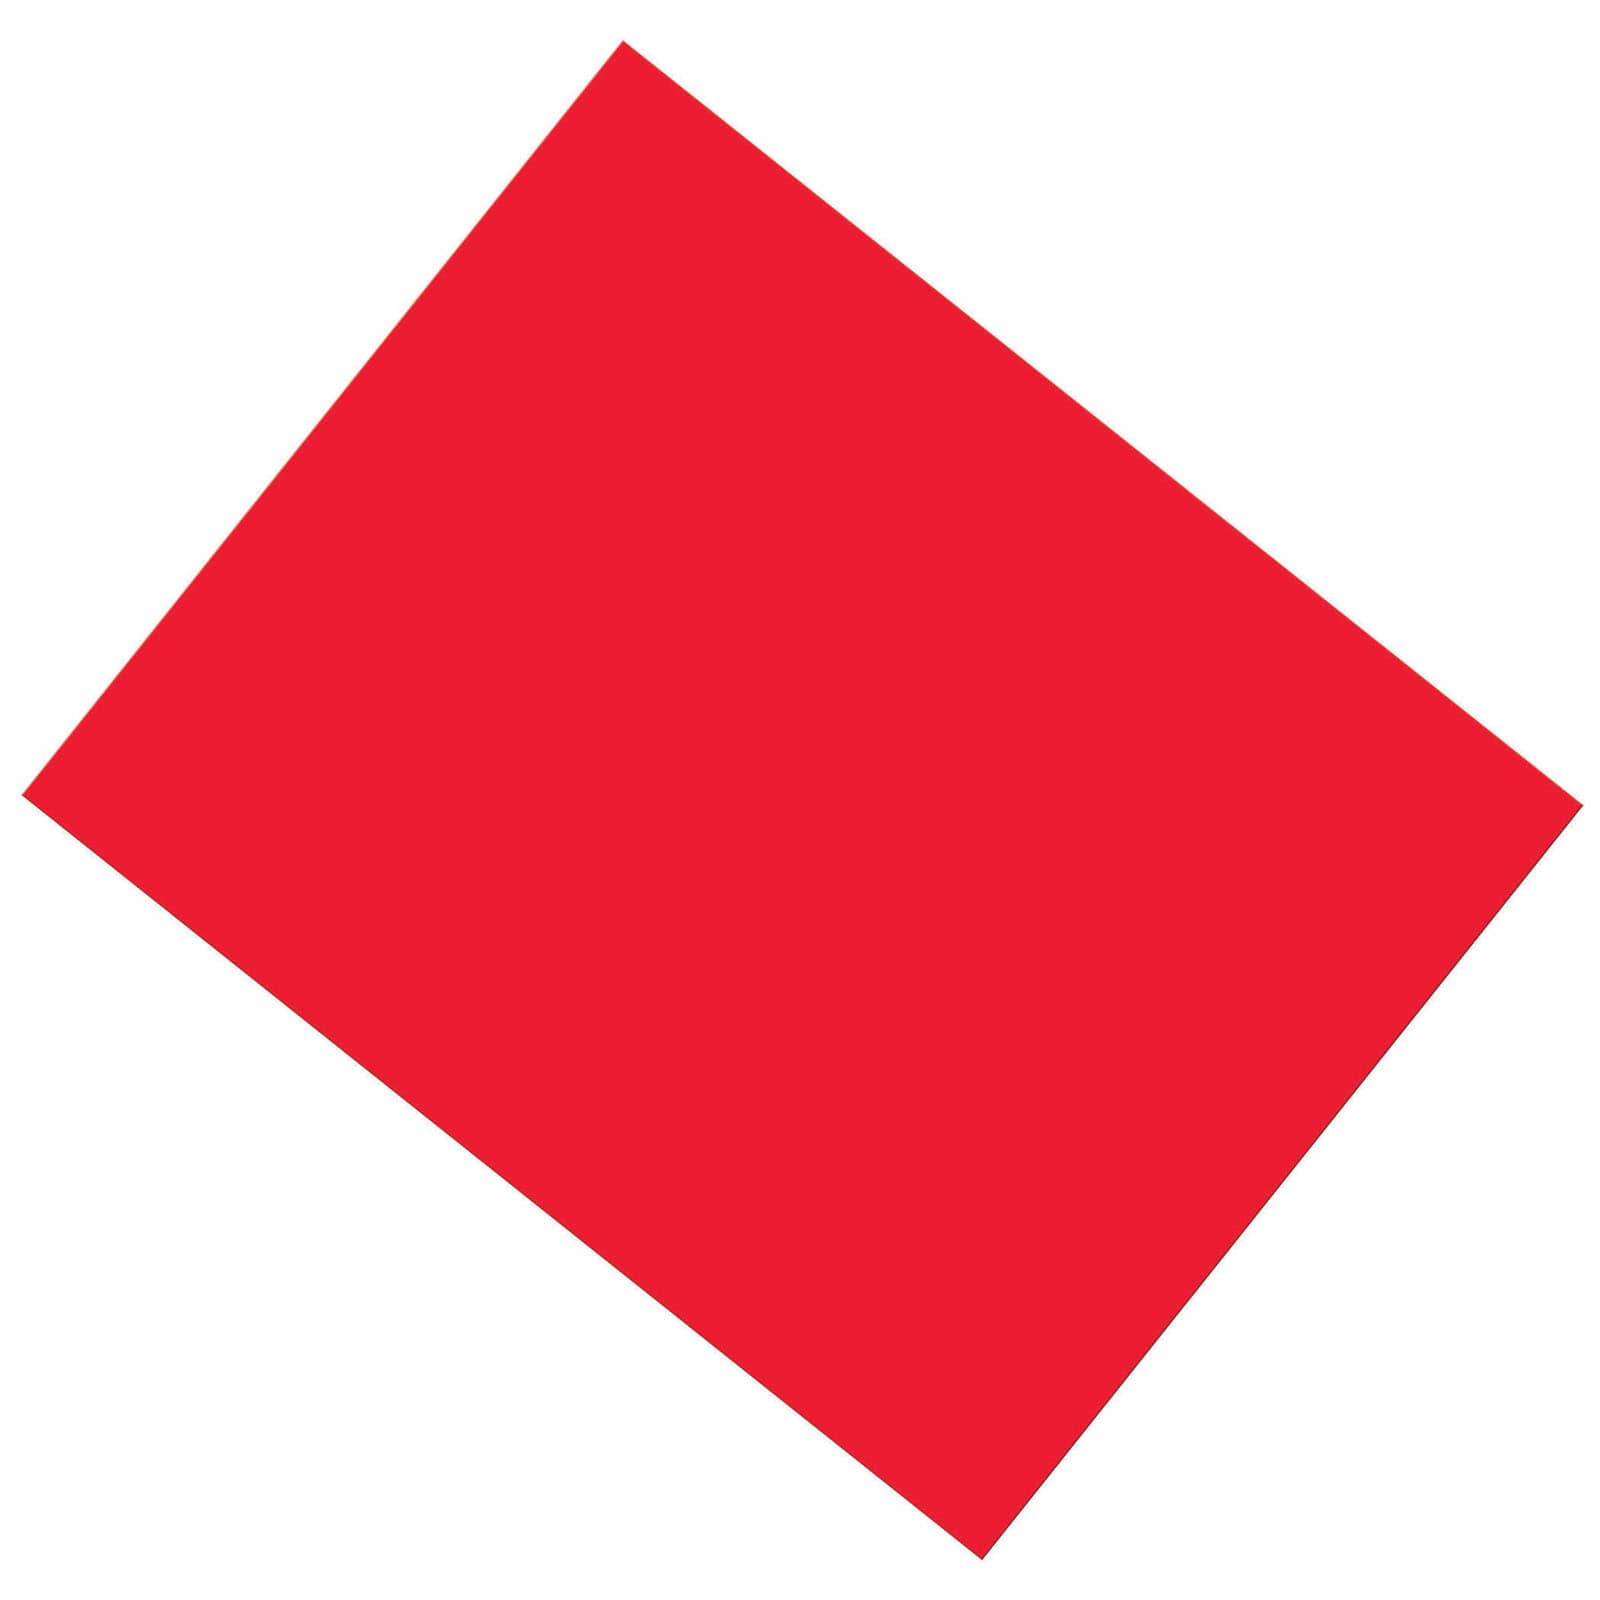 UCreate® Red Coated 22 x 28 Poster Board, 25ct.